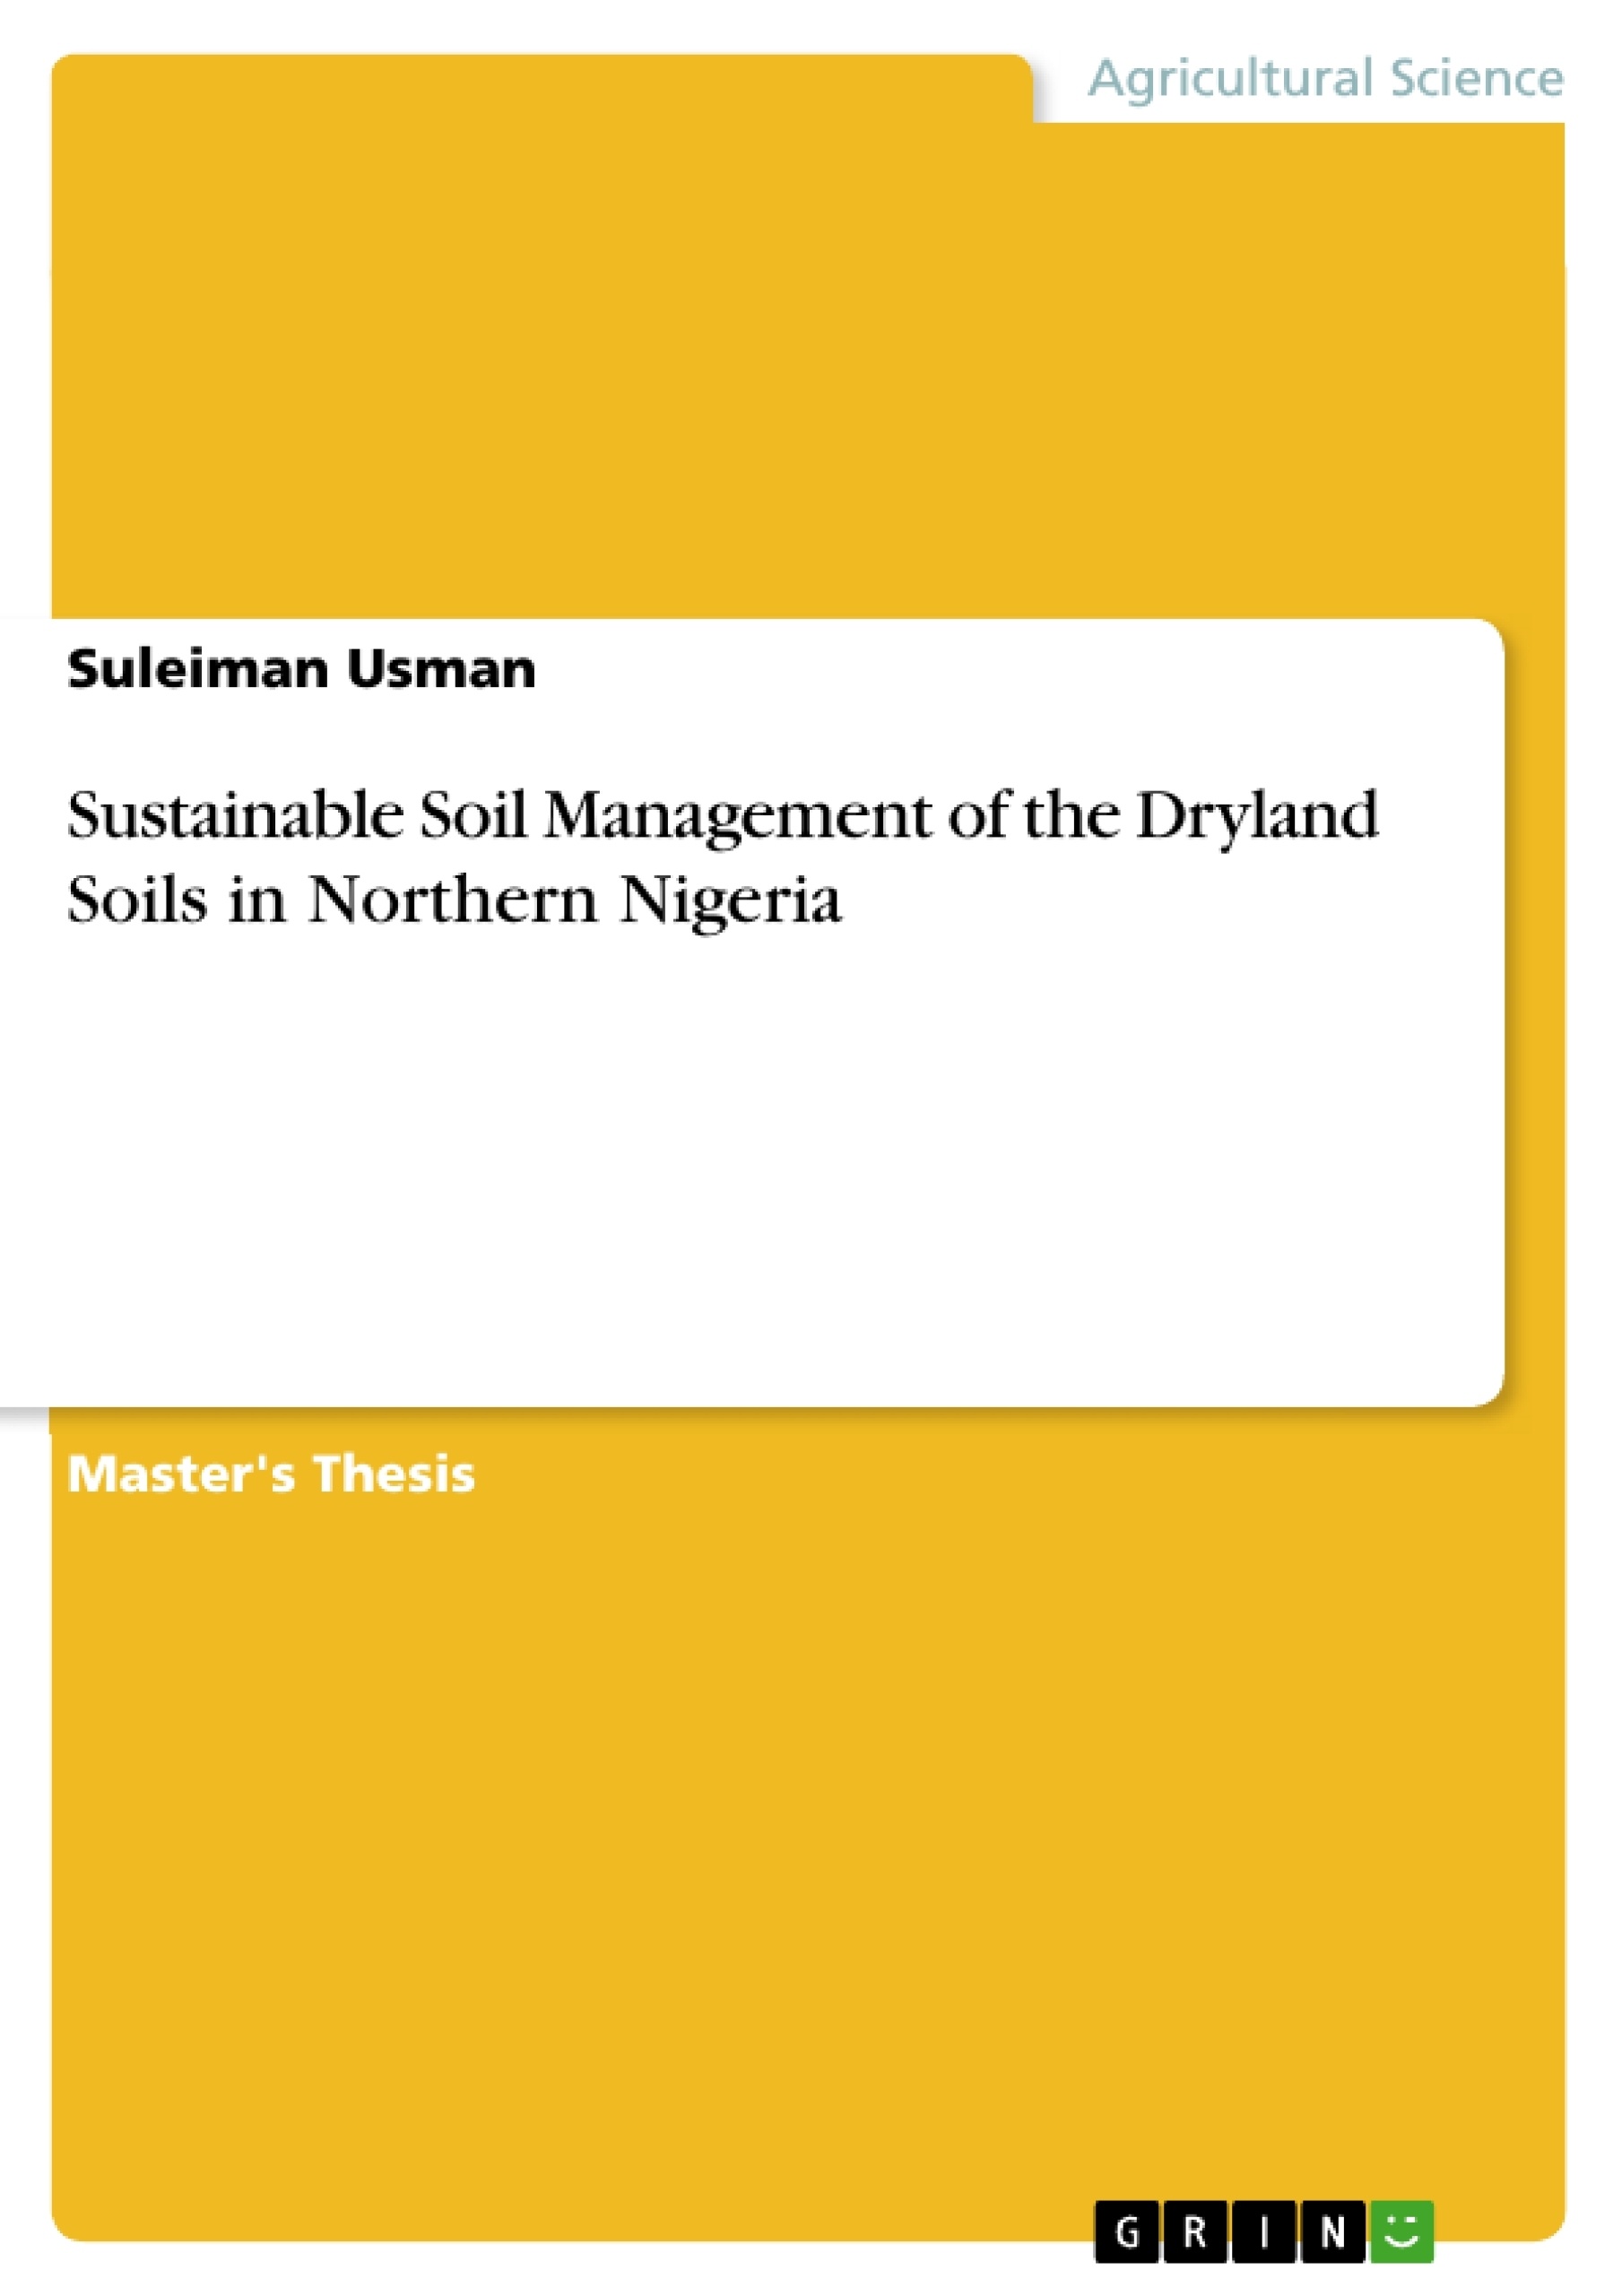 Thesis on soil and water conservation